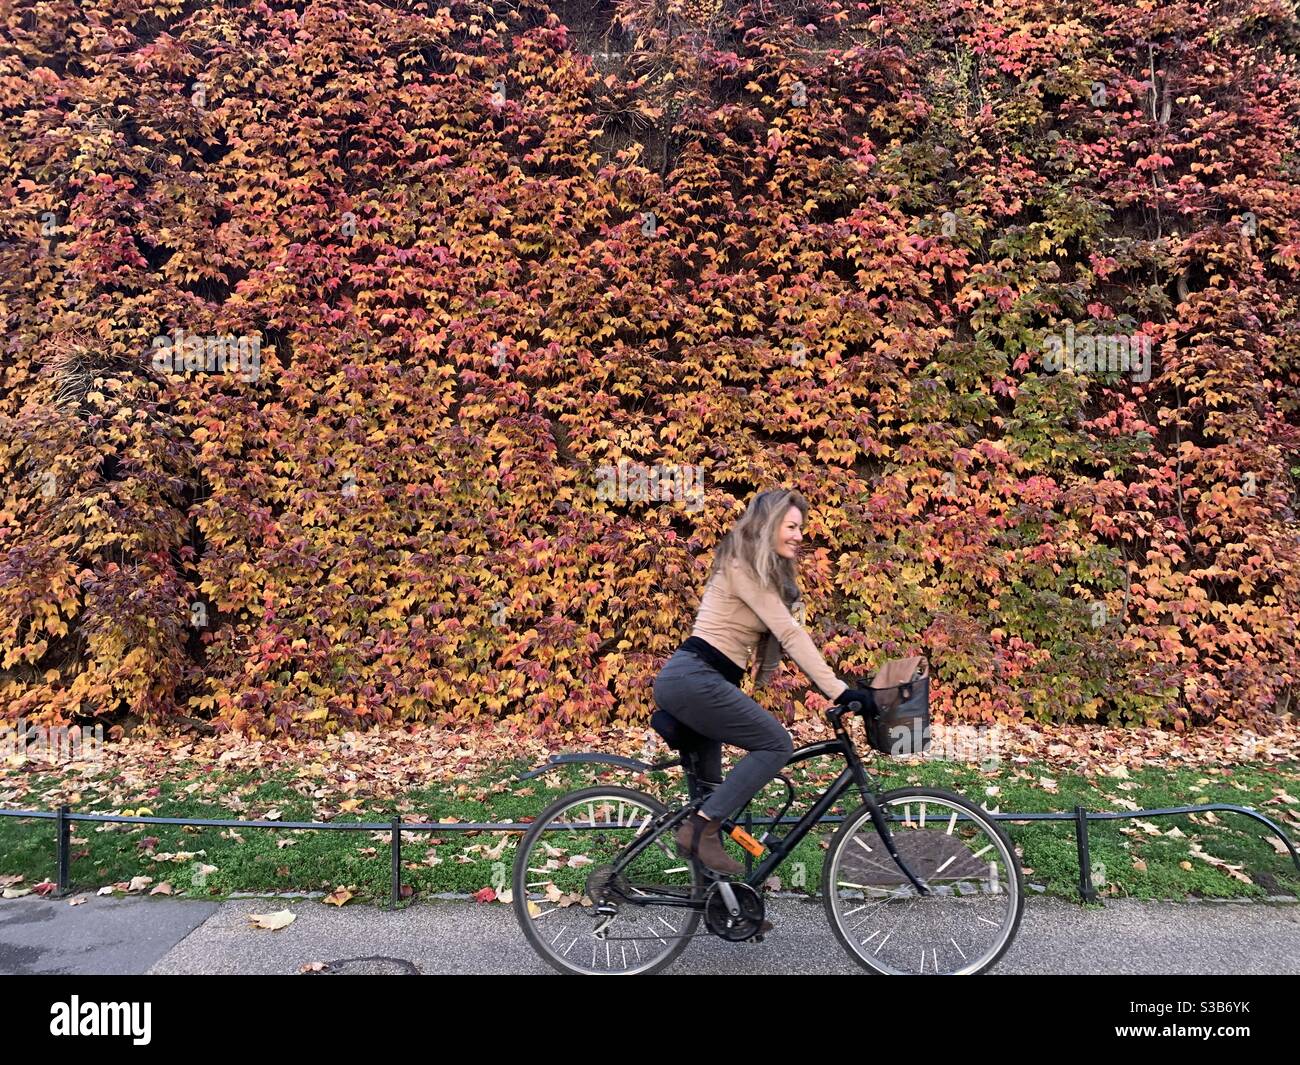 Female cyclist against wall of autumn leaves Stock Photo